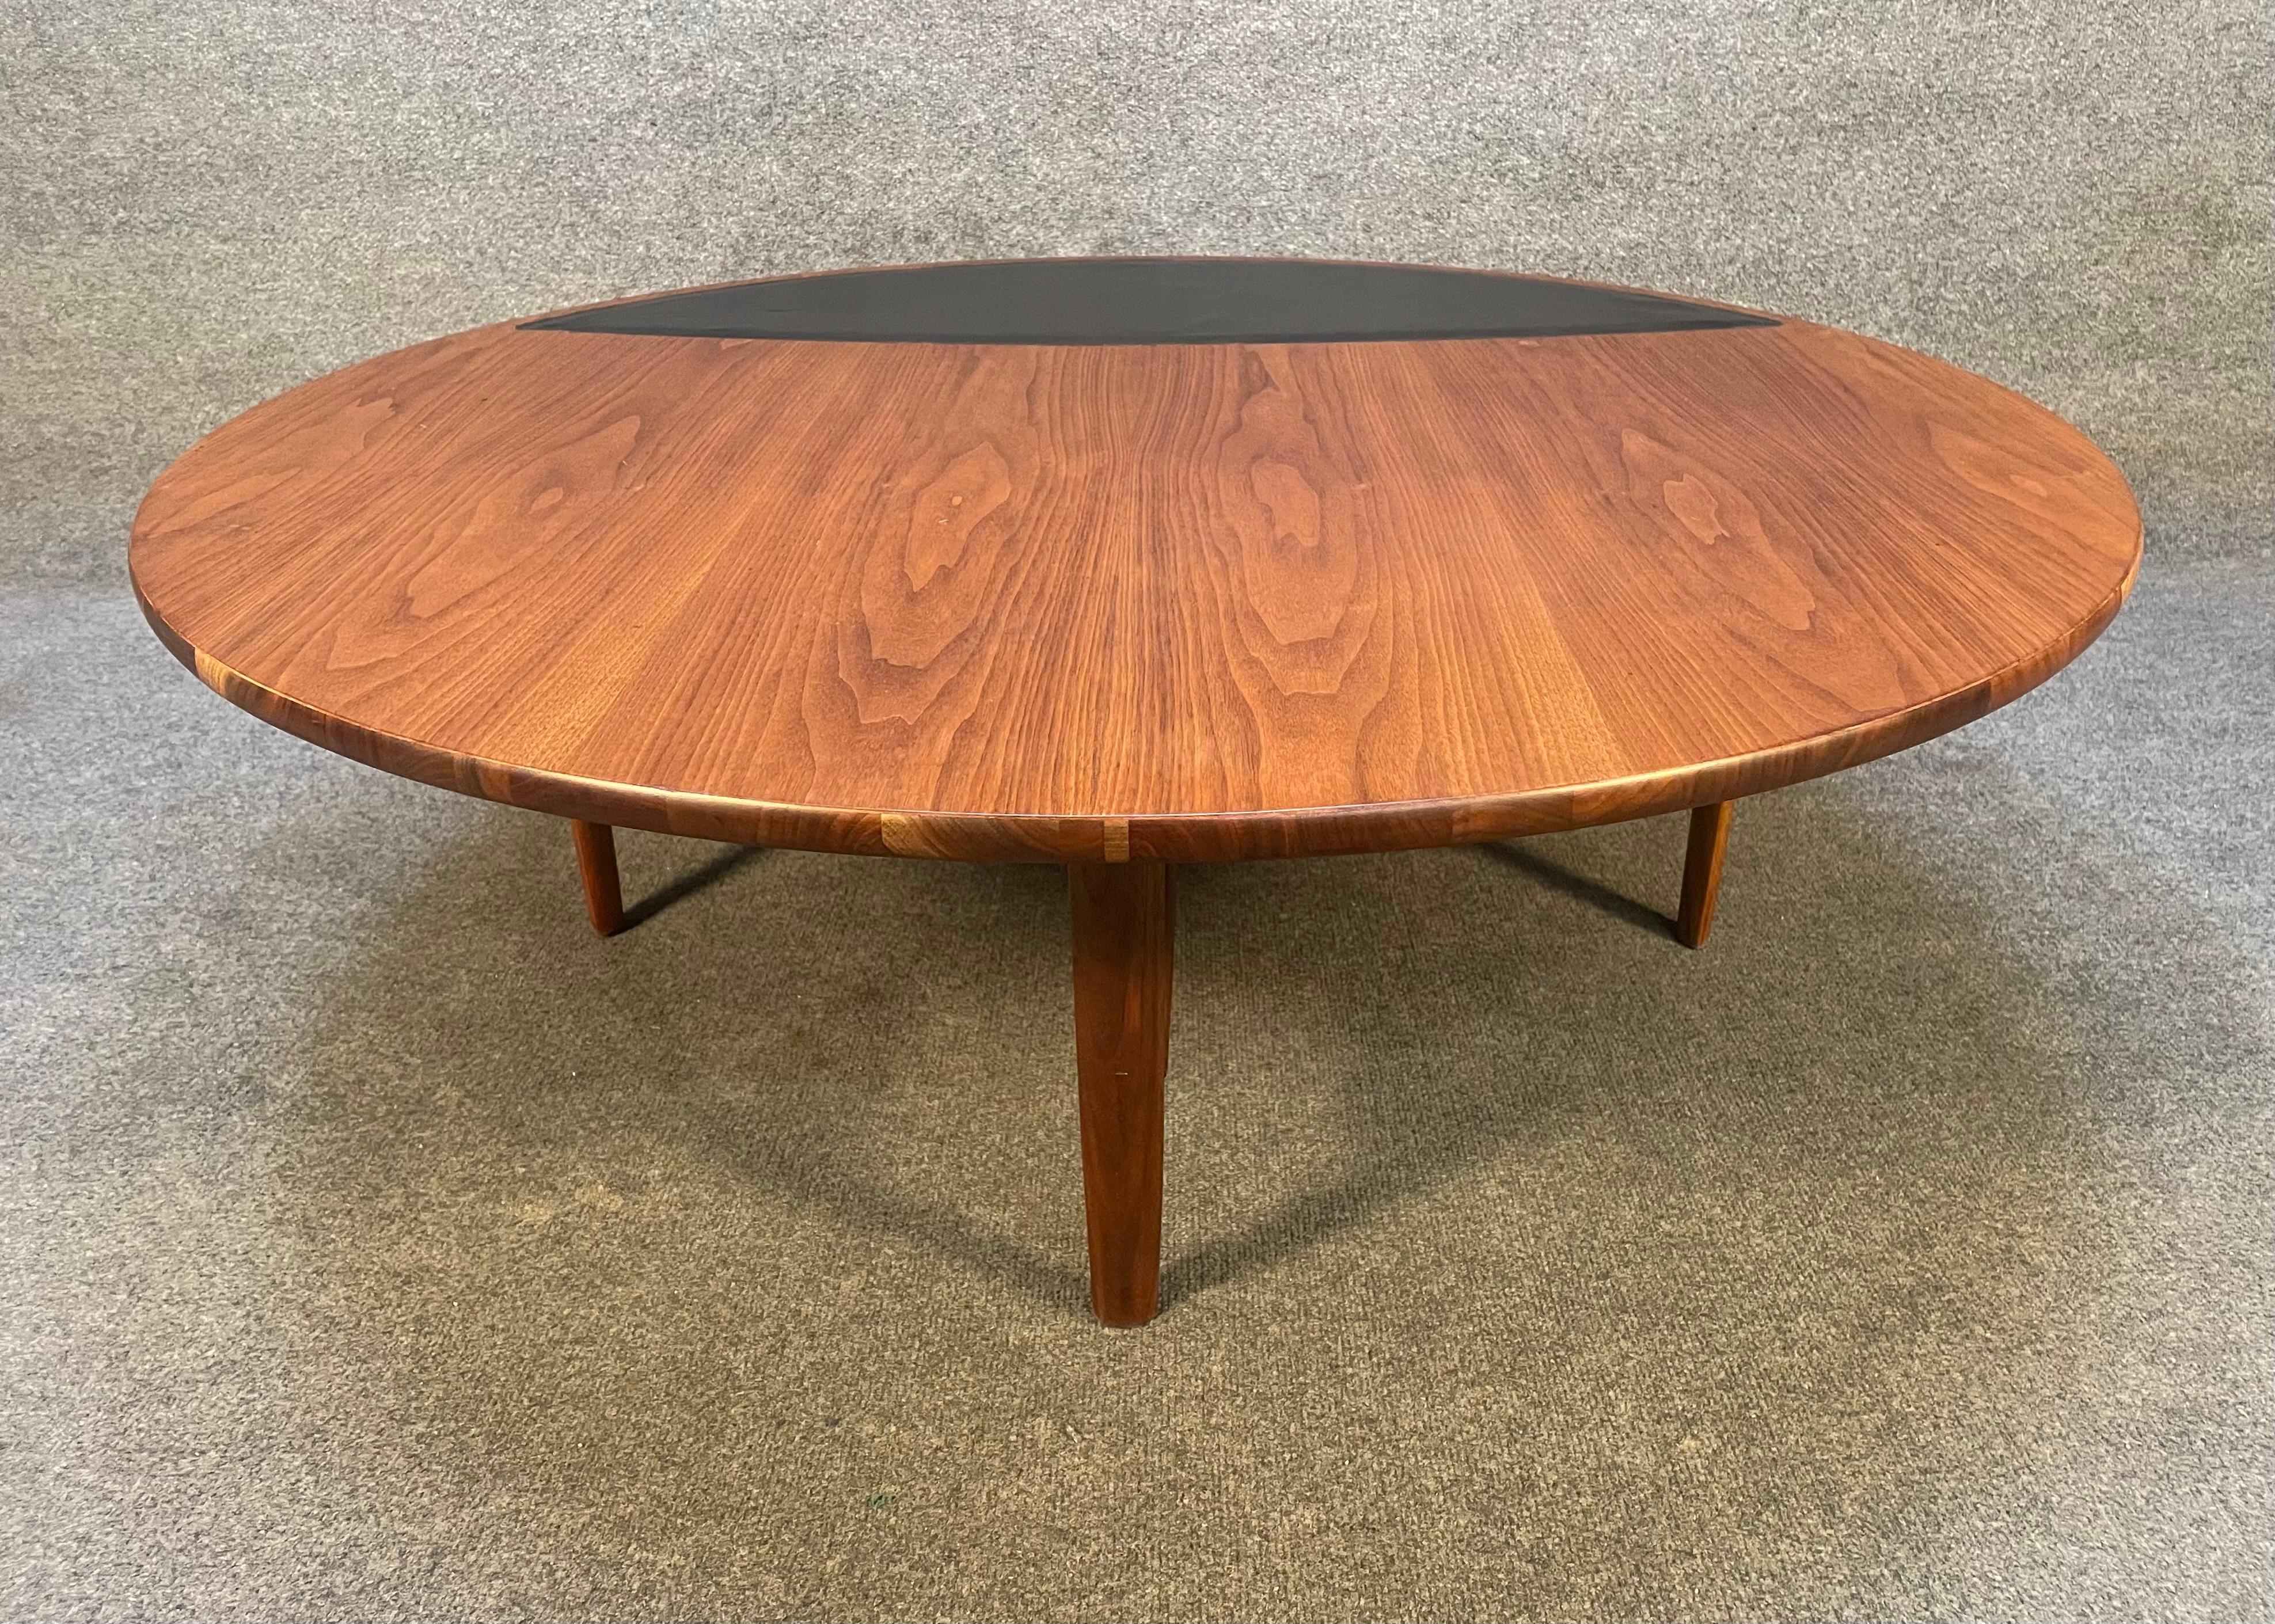 Here is a beautiful Mid-Century Modern coffee table in walnut from the 